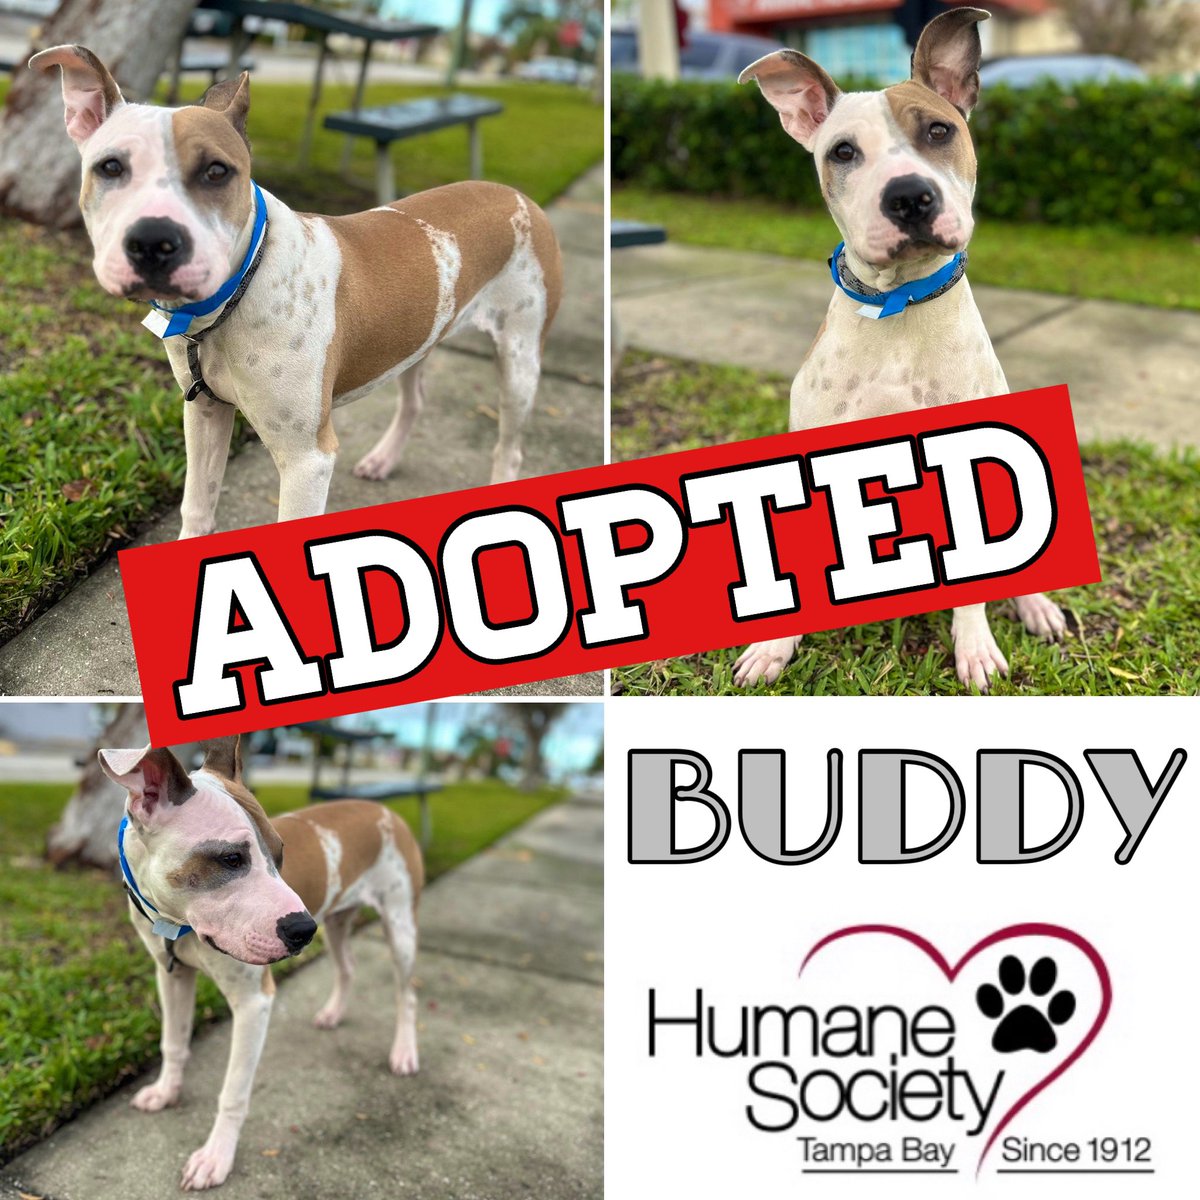 UPDATE / PUPDATE: Great News! BUDDY got ADOPTED! 😃 Congratulations to BUDDY and his new forever family! If you or anyone you know is looking for a BEST FRIEND please visit @HumaneTampaBay #adoptdontshop🐾